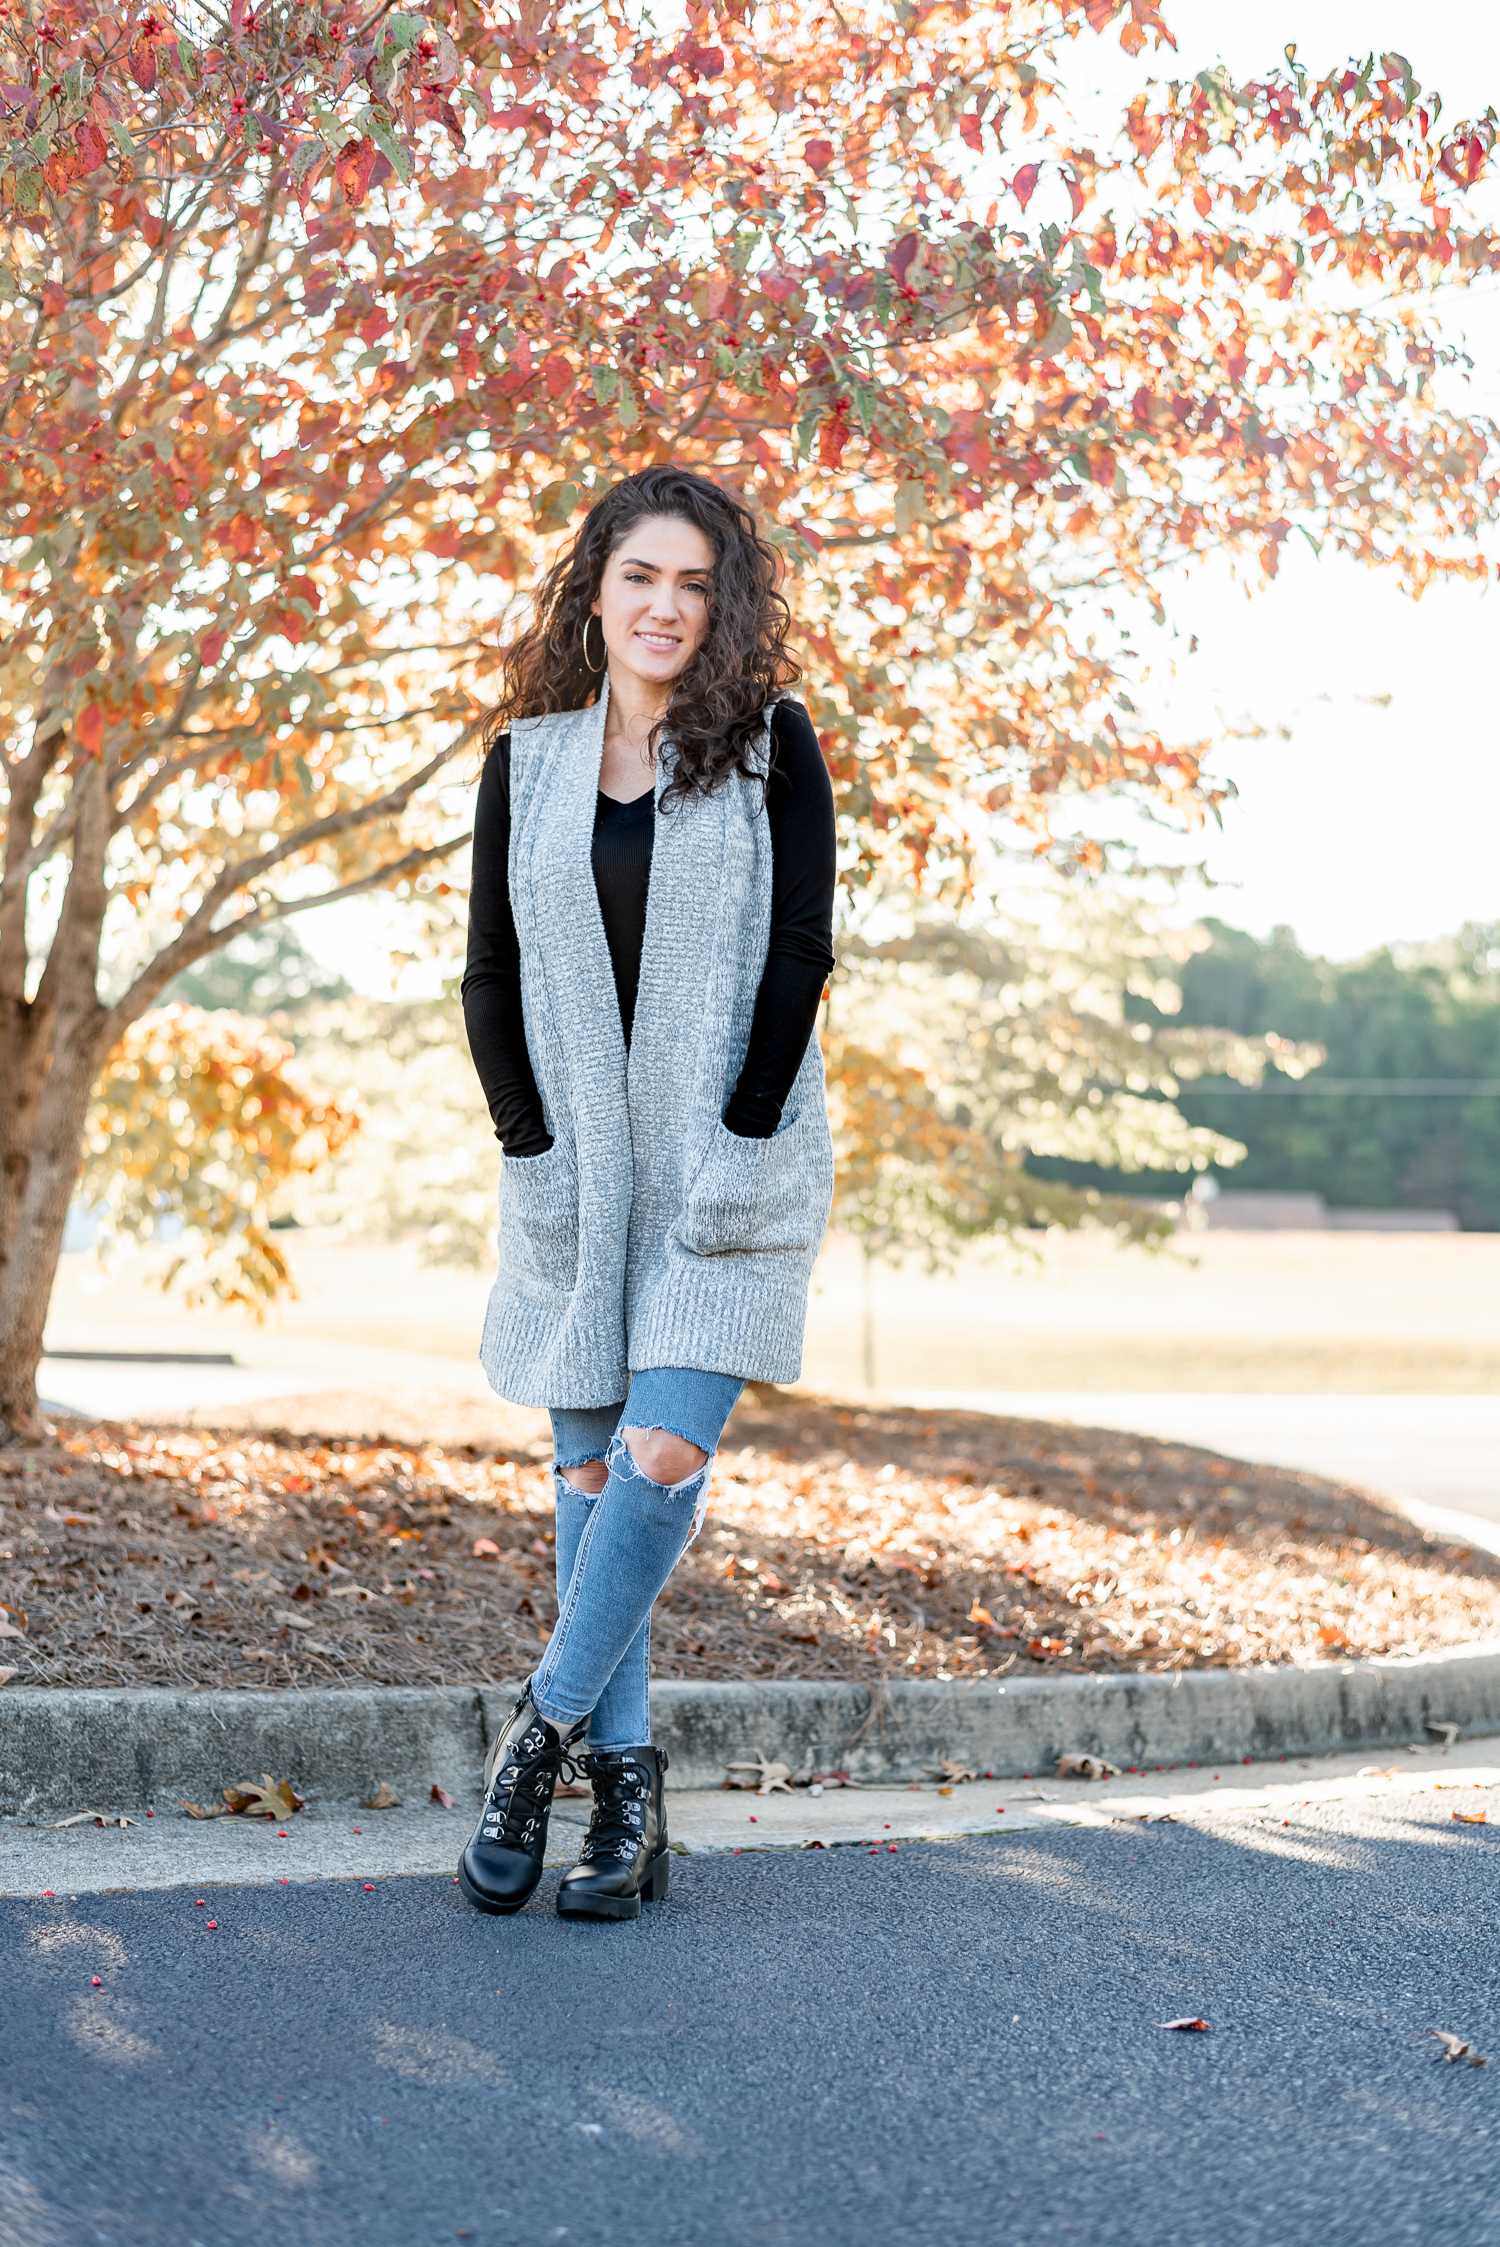 Fall Sweater Vest, Loft Sweater Vest, How to Style a Sweater Vest, Atlanta Style Bloggers, Erica Valentin, Bloggers from Atlanta, Fall Outfit Ideas, How to Style Combat Boots